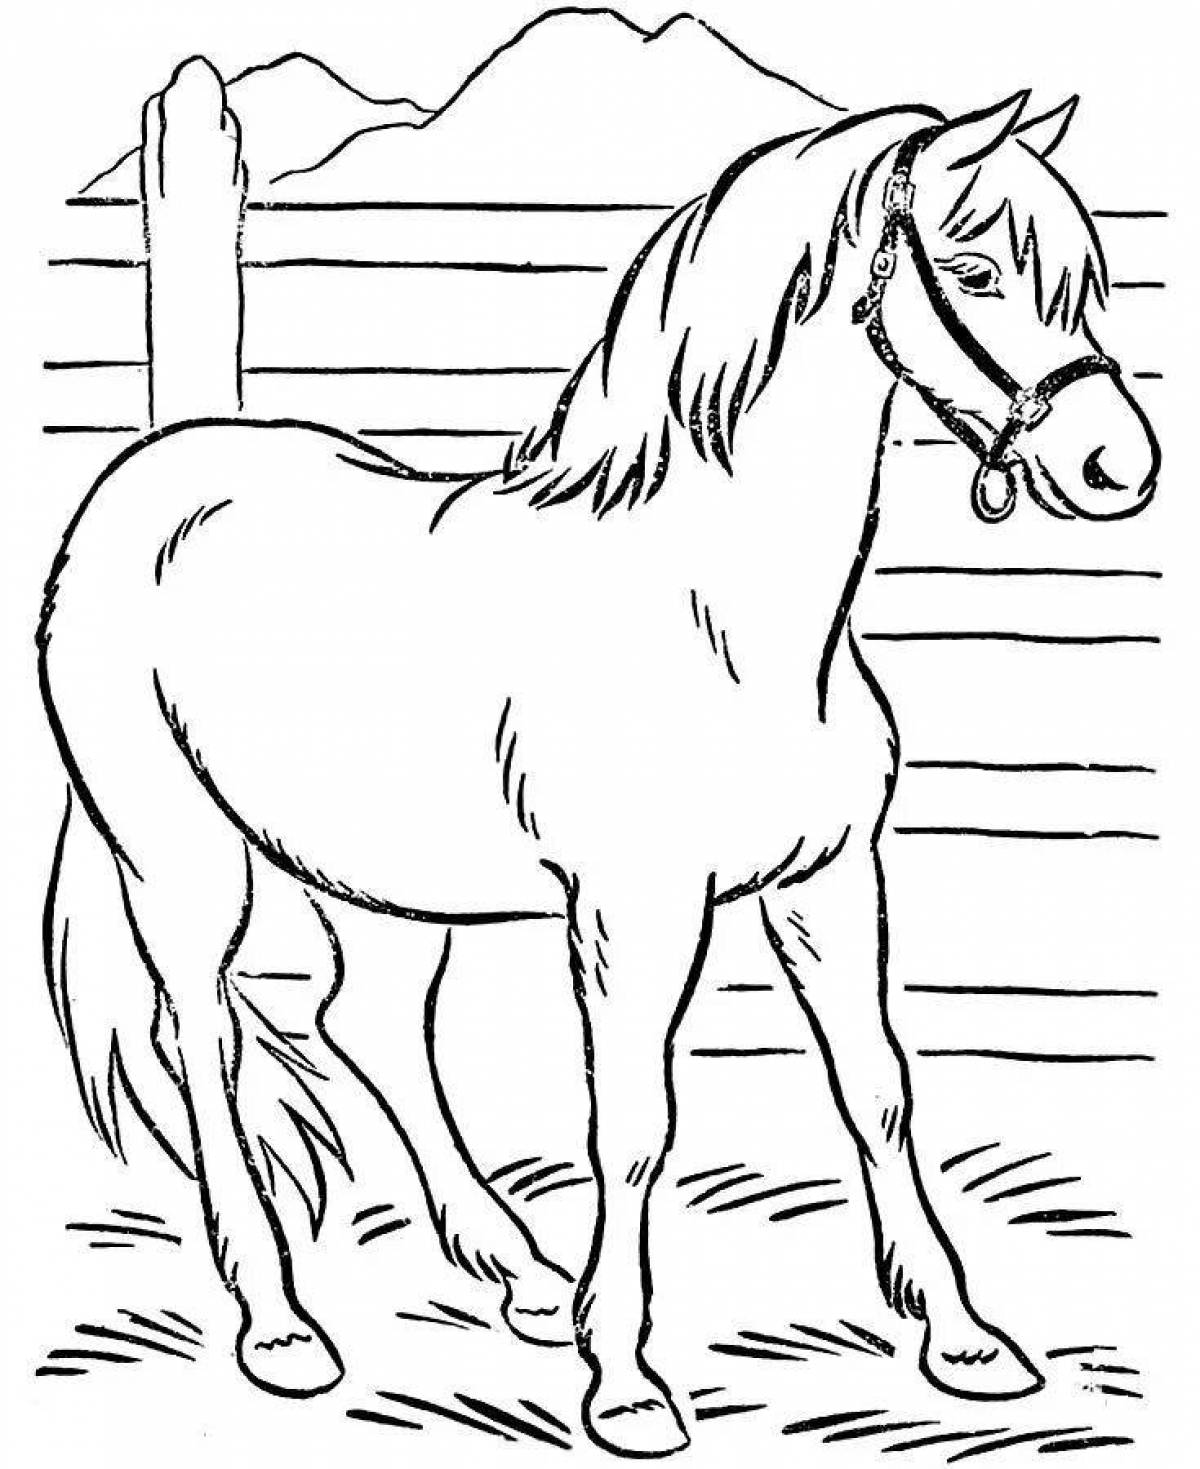 Vibrant gray horse coloring book for kids